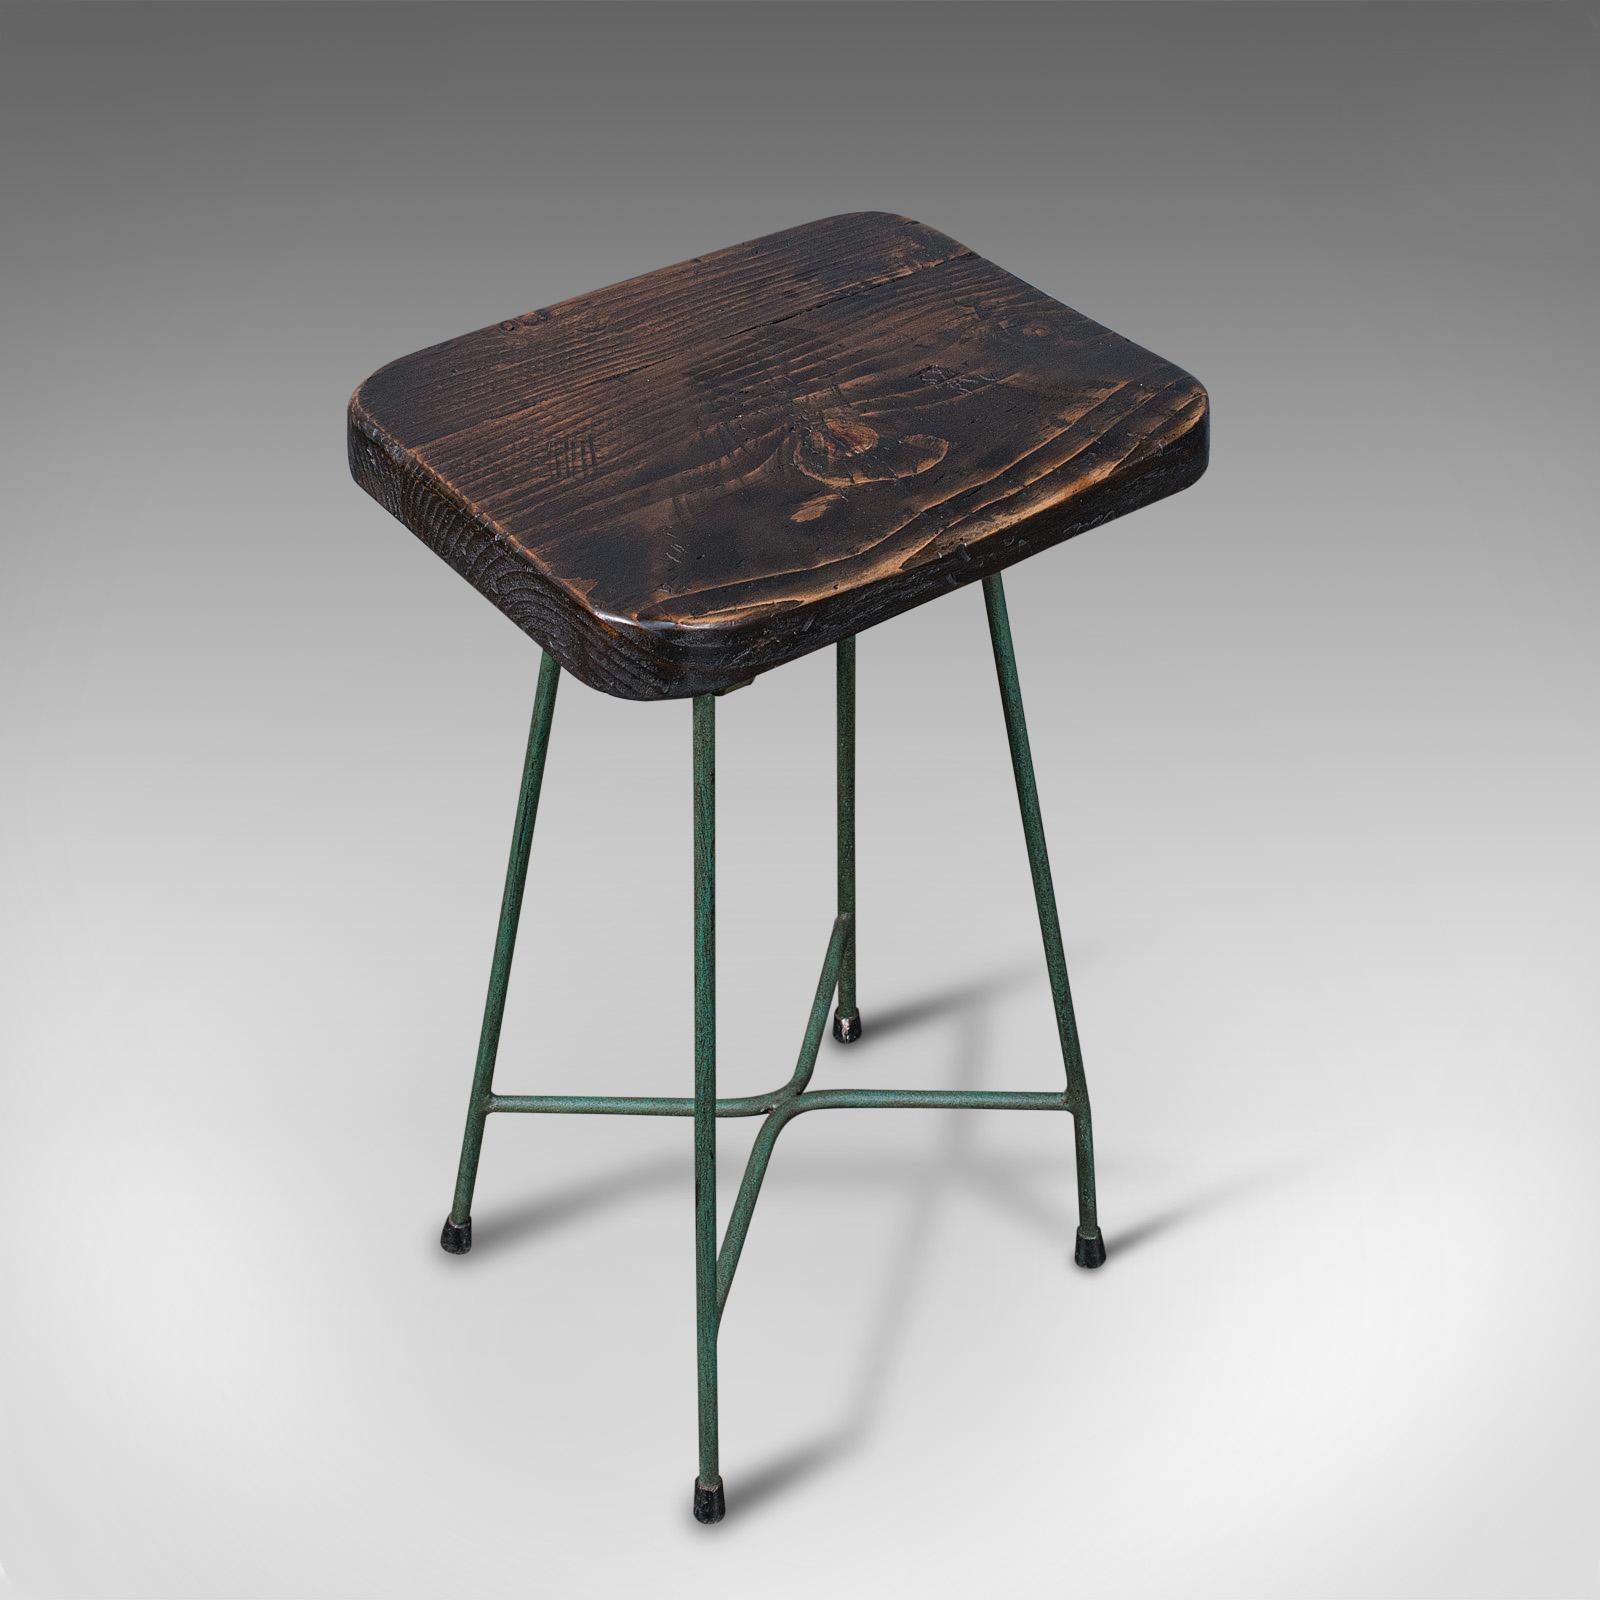 Vintage Munitions Factory Stool, English, Pine, Industrial Taste, Lab Seat, 1940 In Good Condition For Sale In Hele, Devon, GB